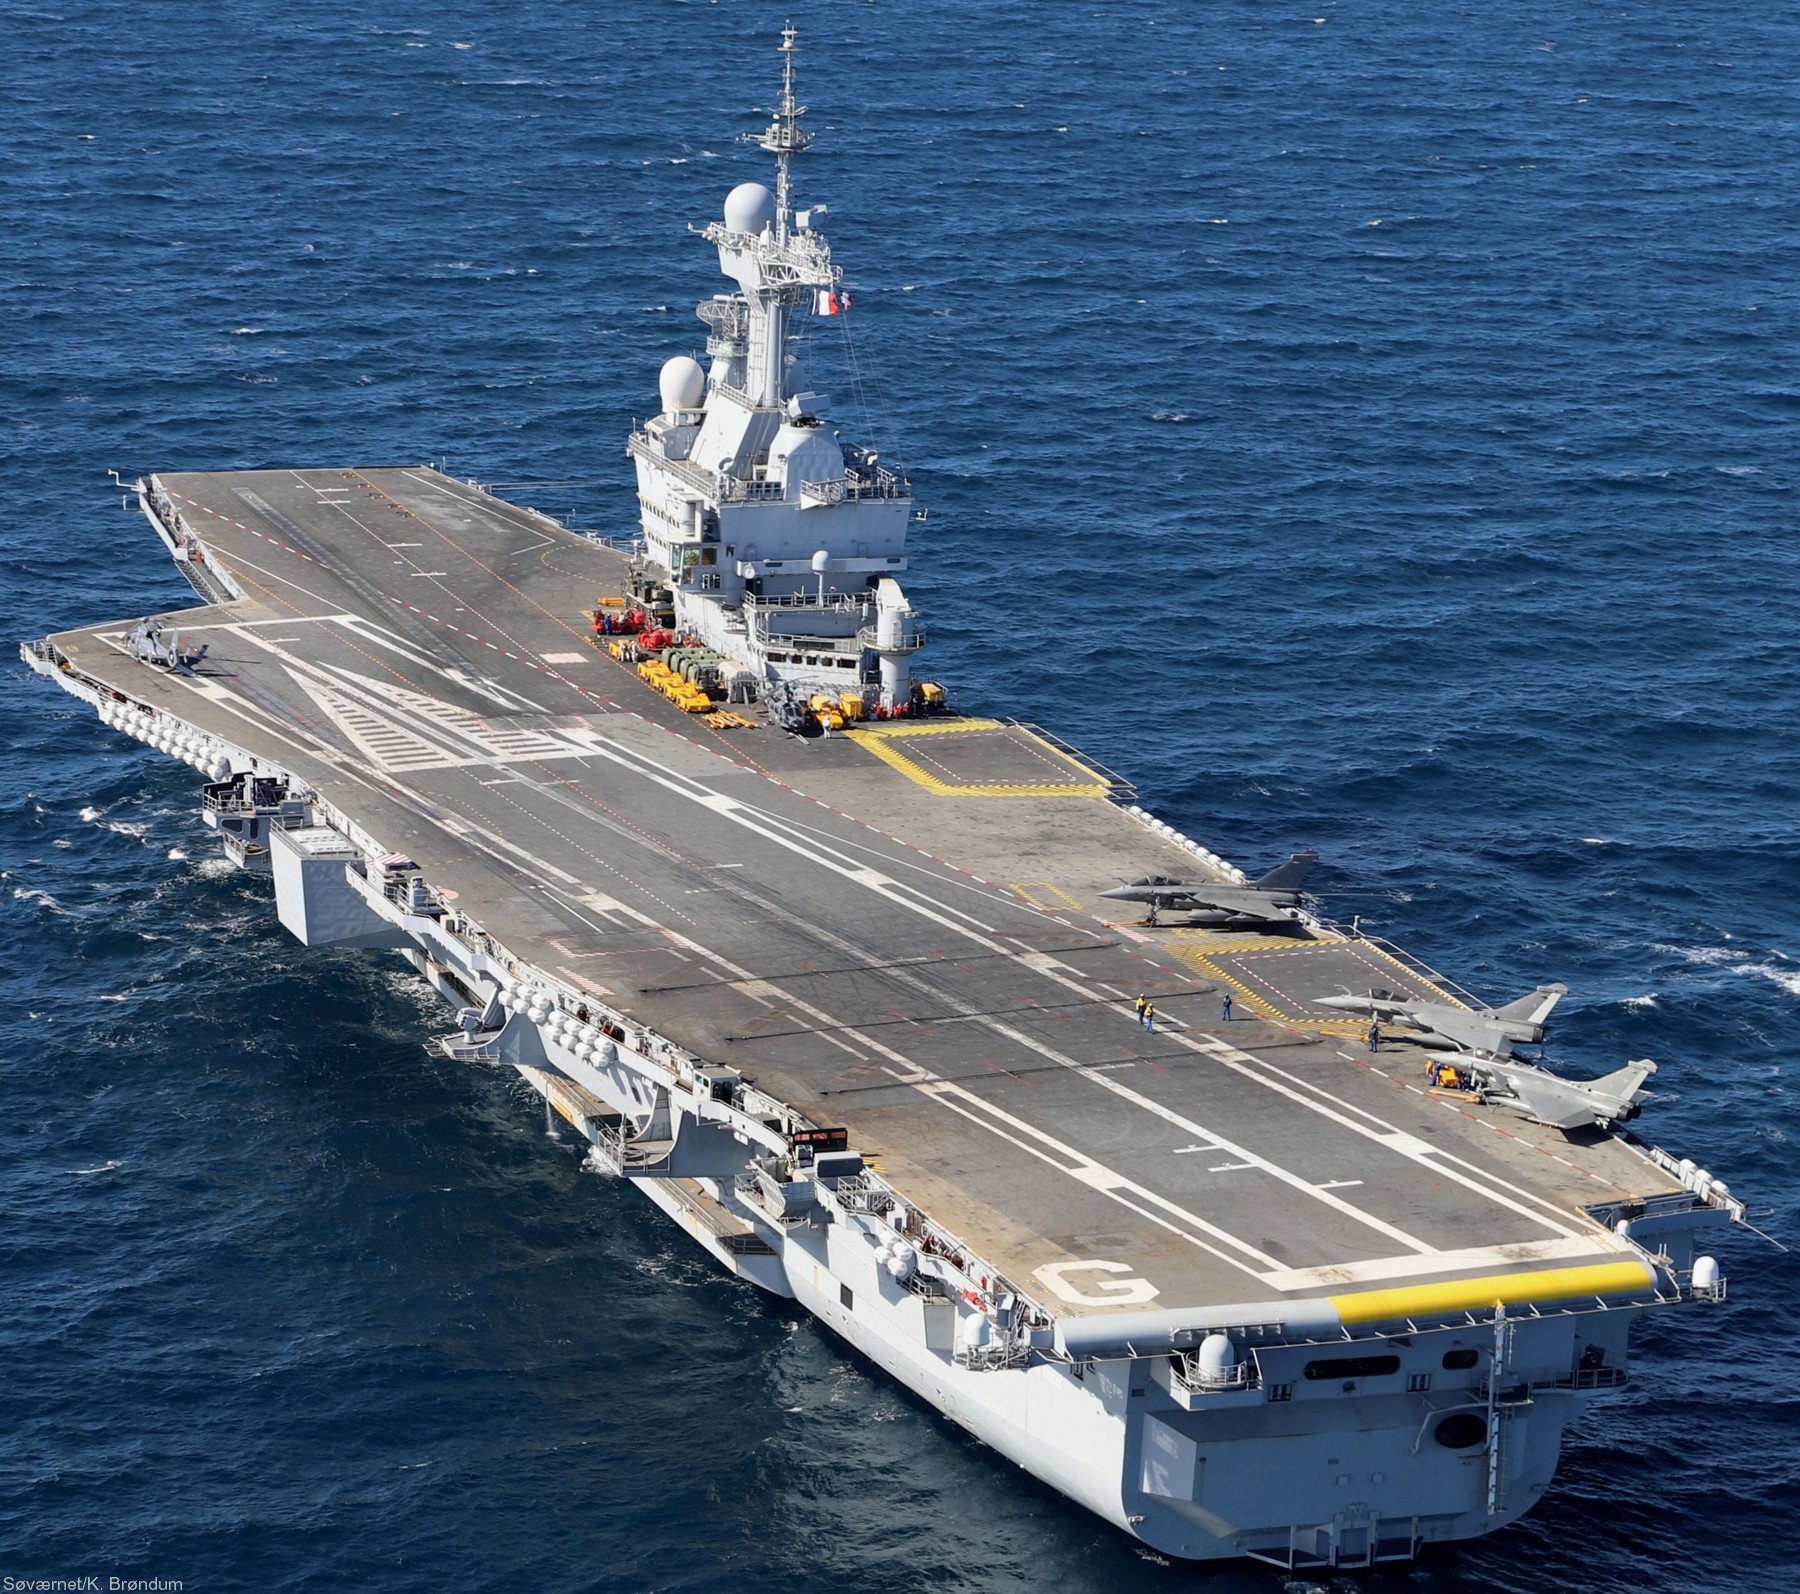 r-91 fs charles de gaulle aircraft carrier french navy porte avions 92